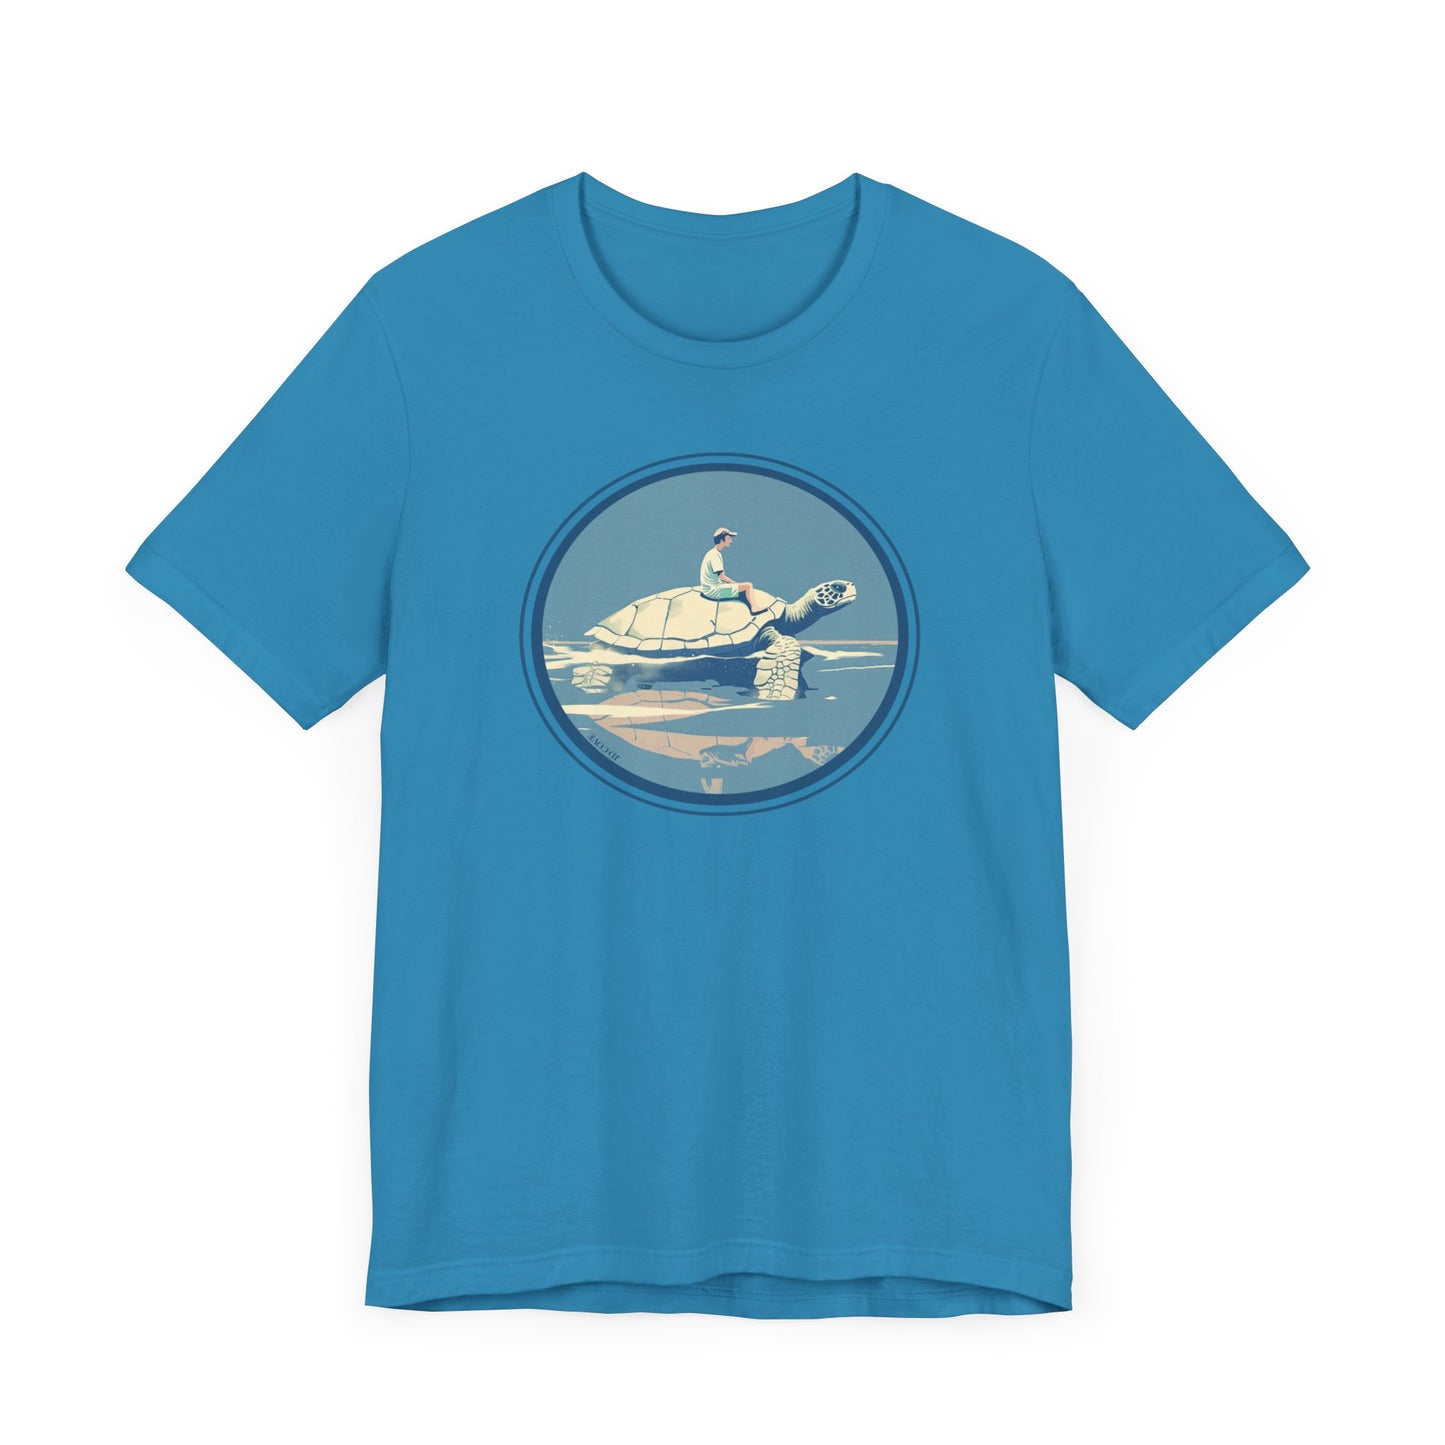 Traveler Sea Turtles Graphic Tee - Unisex Eco-Friendly Cotton Shirt by JD Cove